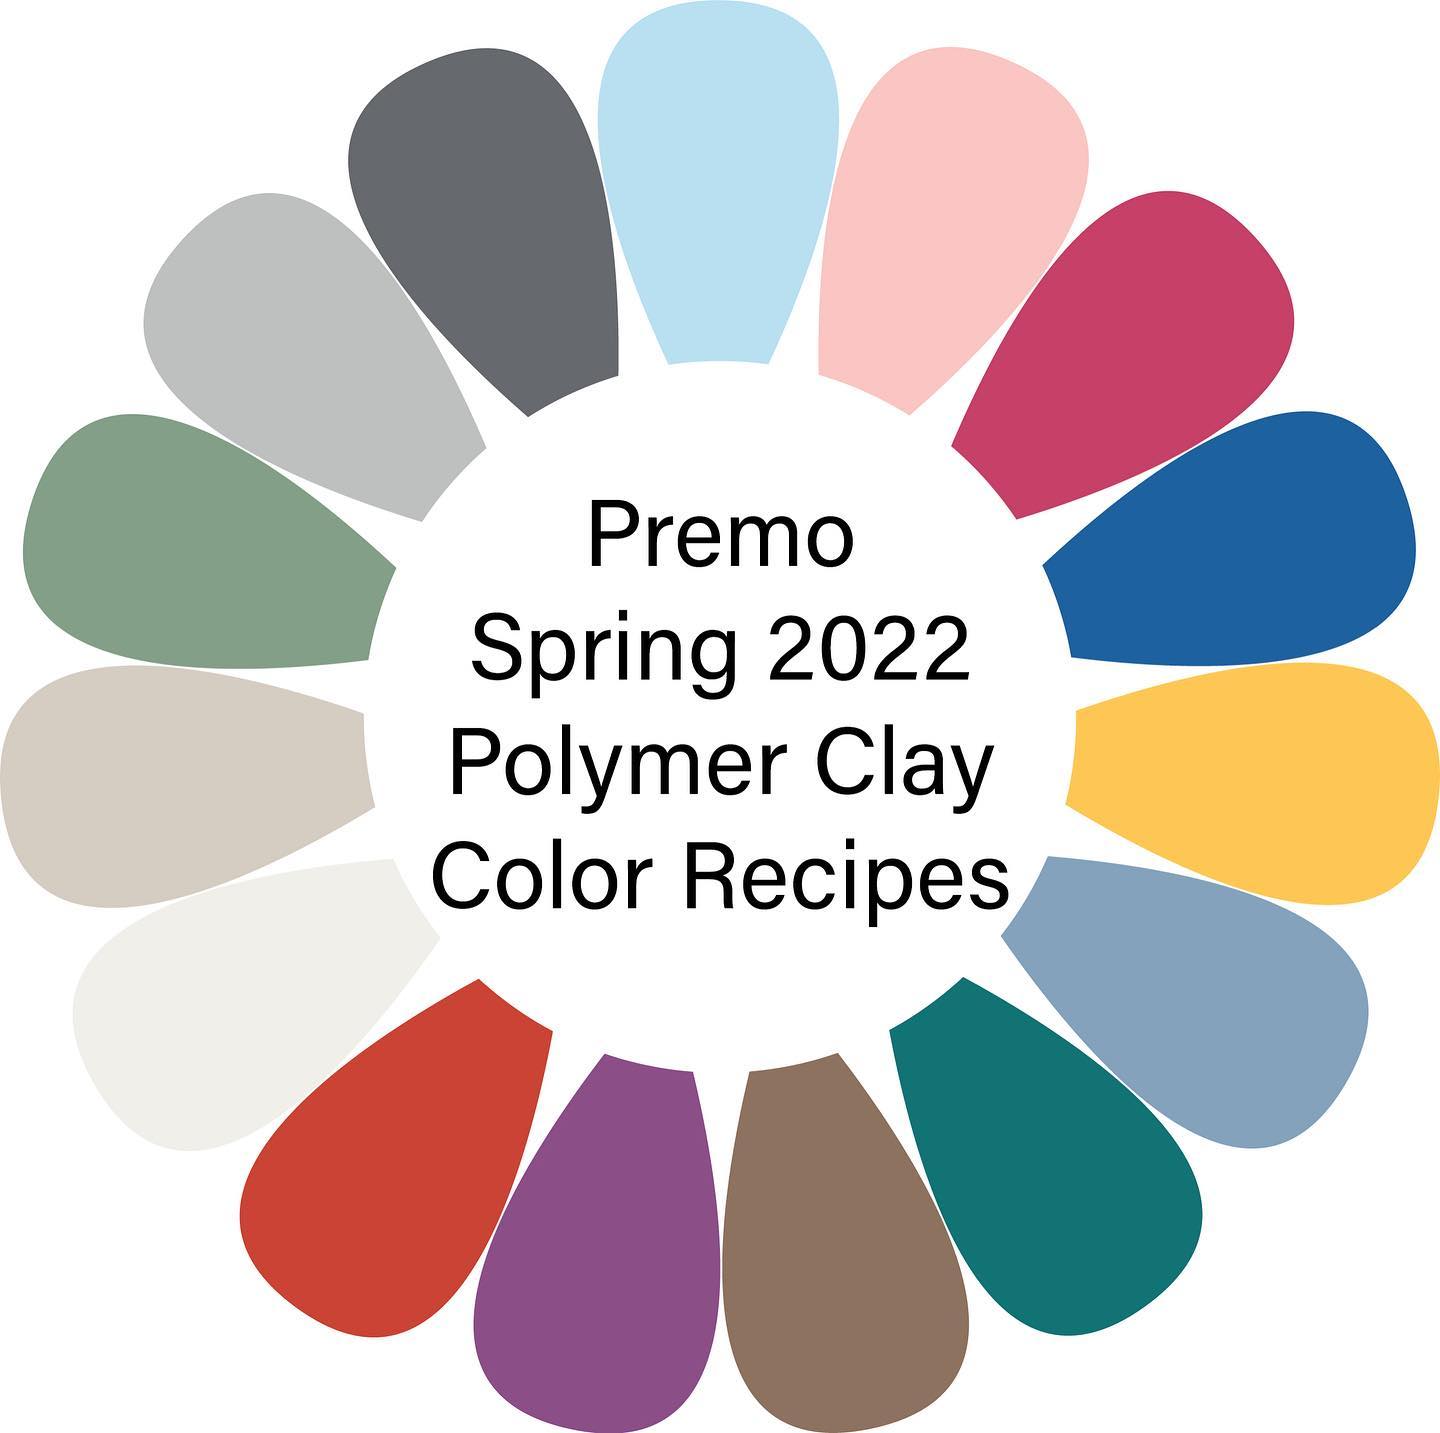 Premo Spring 2022 color recipes are now available in my etsy shop. Link to shop in bio
#polymerclaycolorrecipes #polymer